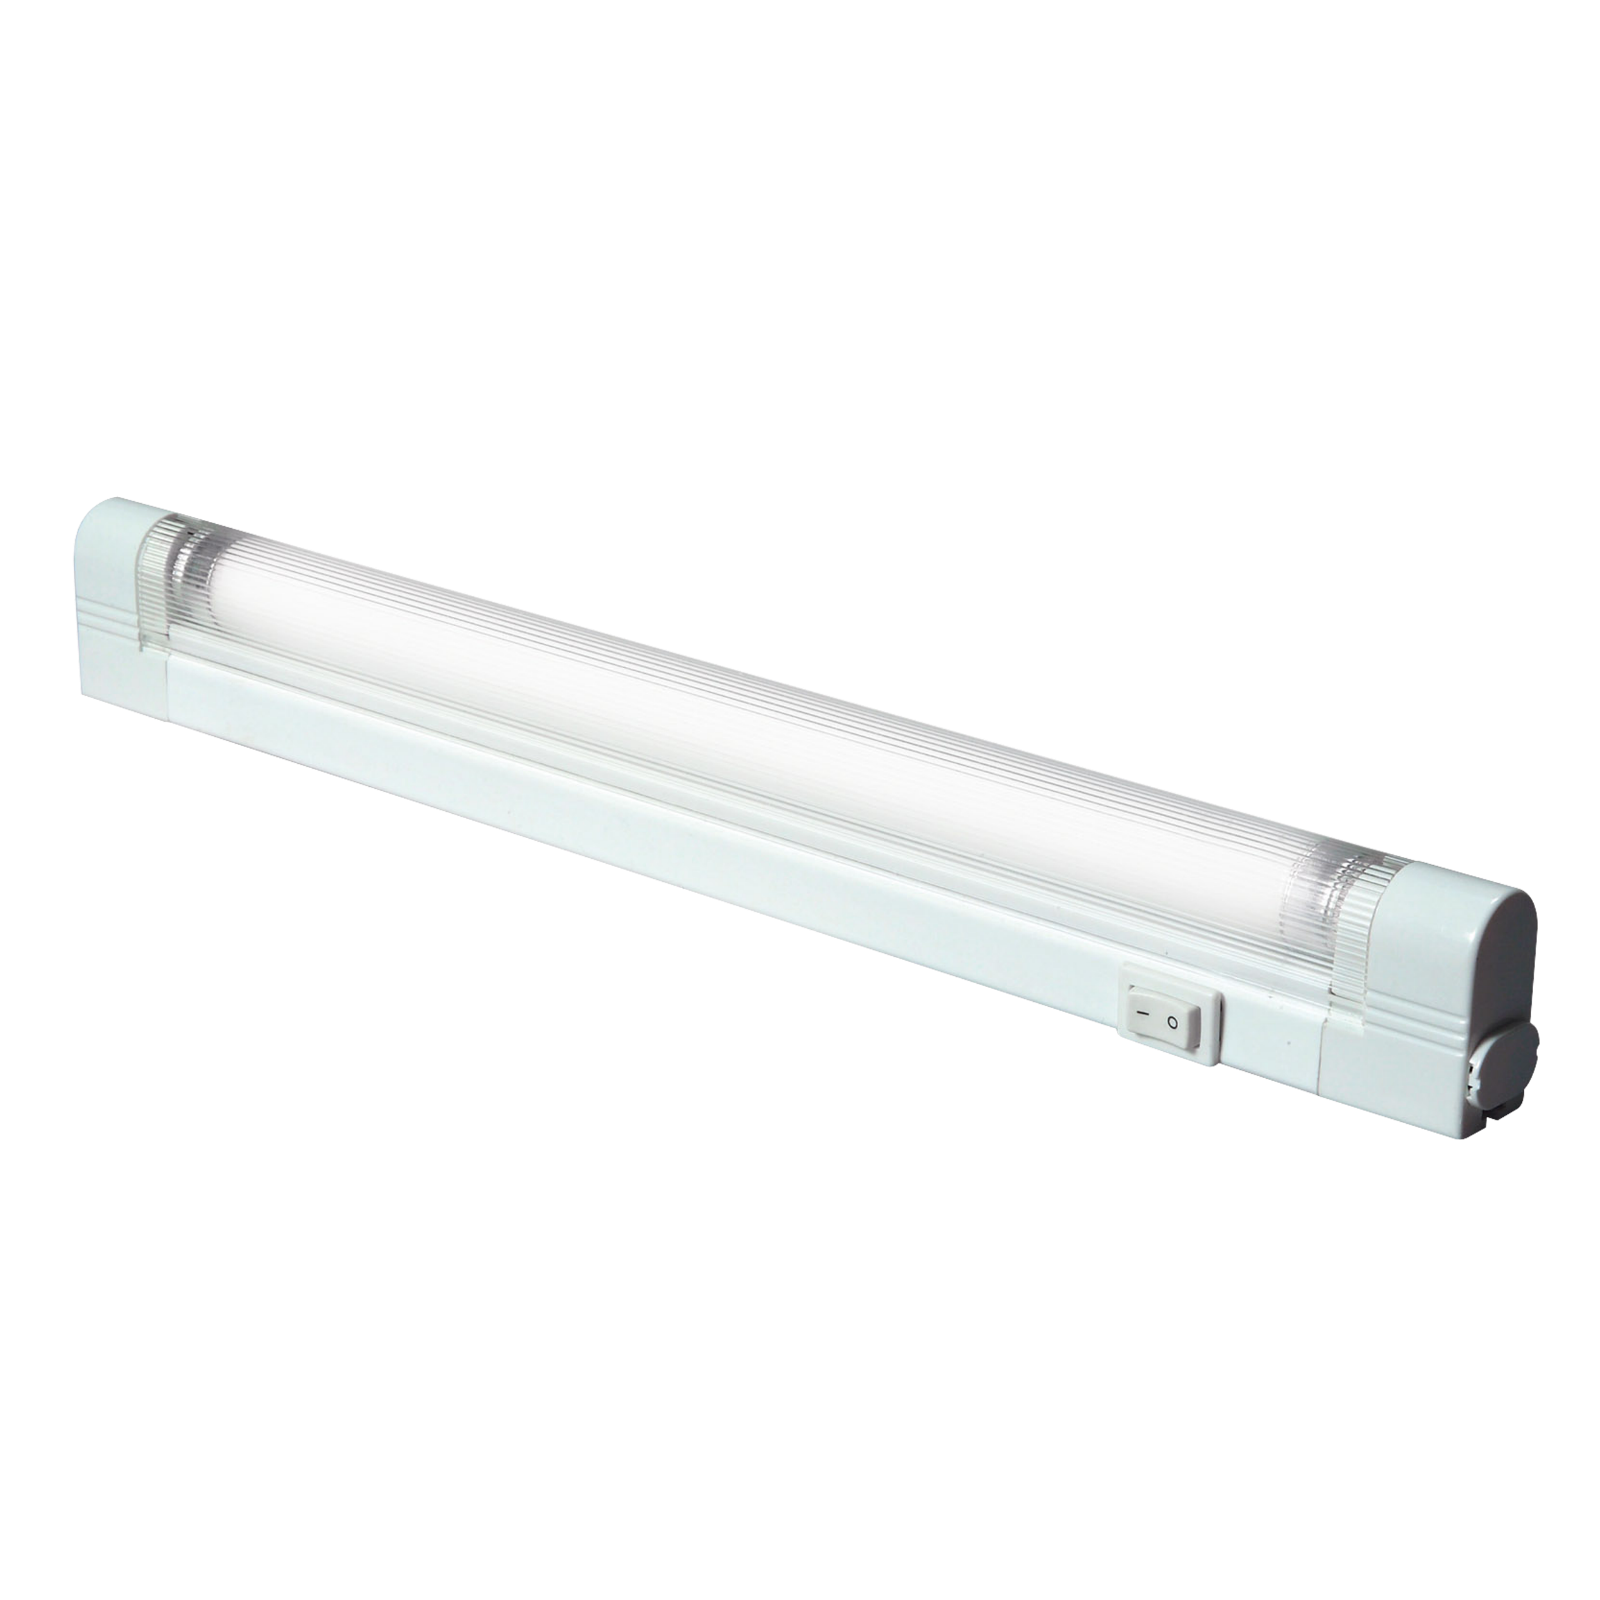 IP20 T5/G5 28W Slimline Linkable Fluorescent Fitting With Tube, Switch And Diffuser 3500K - T528 